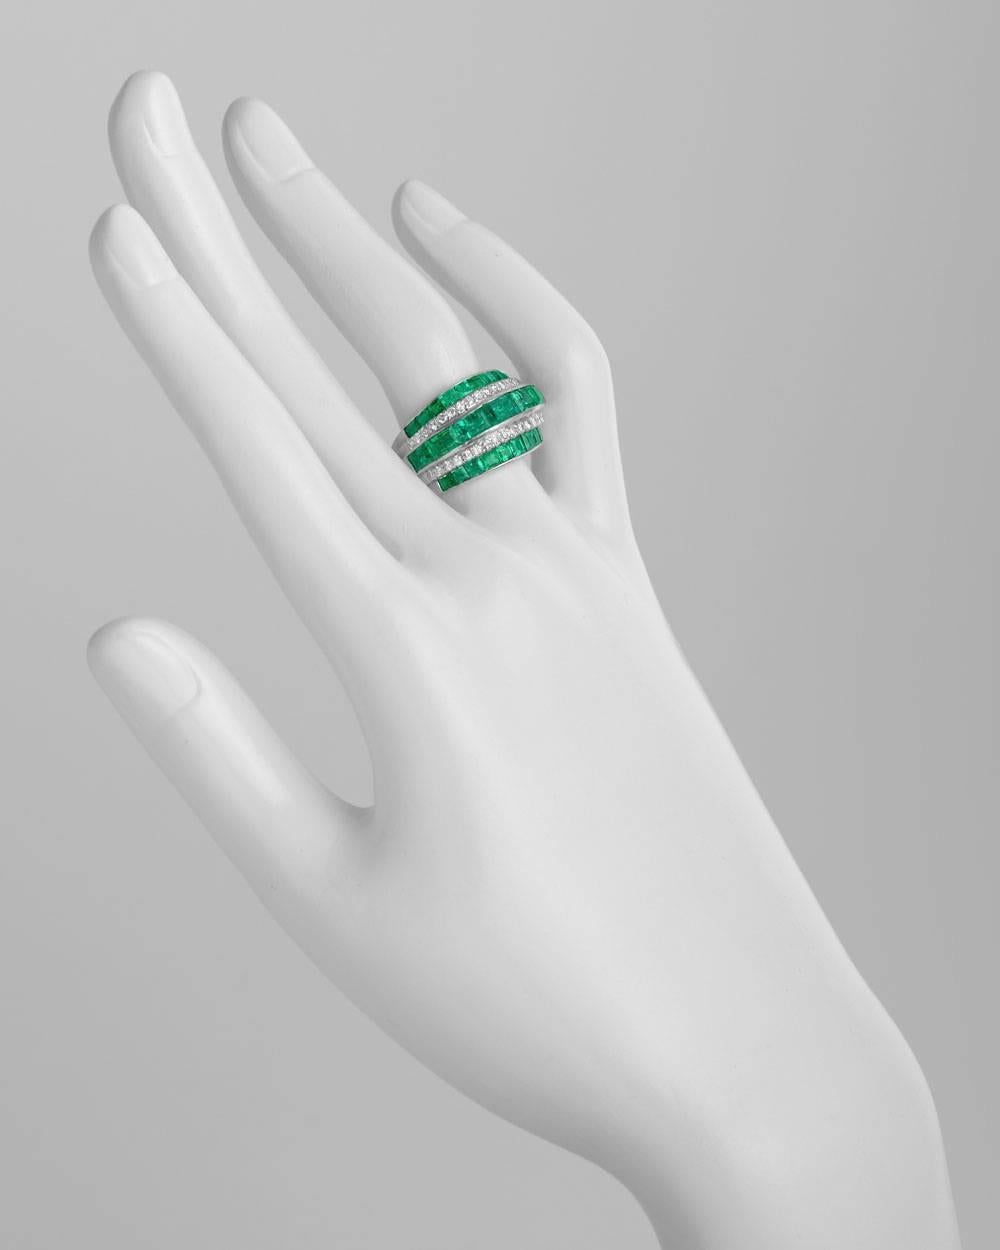 Emerald and diamond band ring, approximately halfway-set with three rows of baguette-cut and square-cut emeralds alternating with two rows of full-cut round diamonds, the diamonds weighing approximately 0.28 total carats, mounted in platinum. Size 8